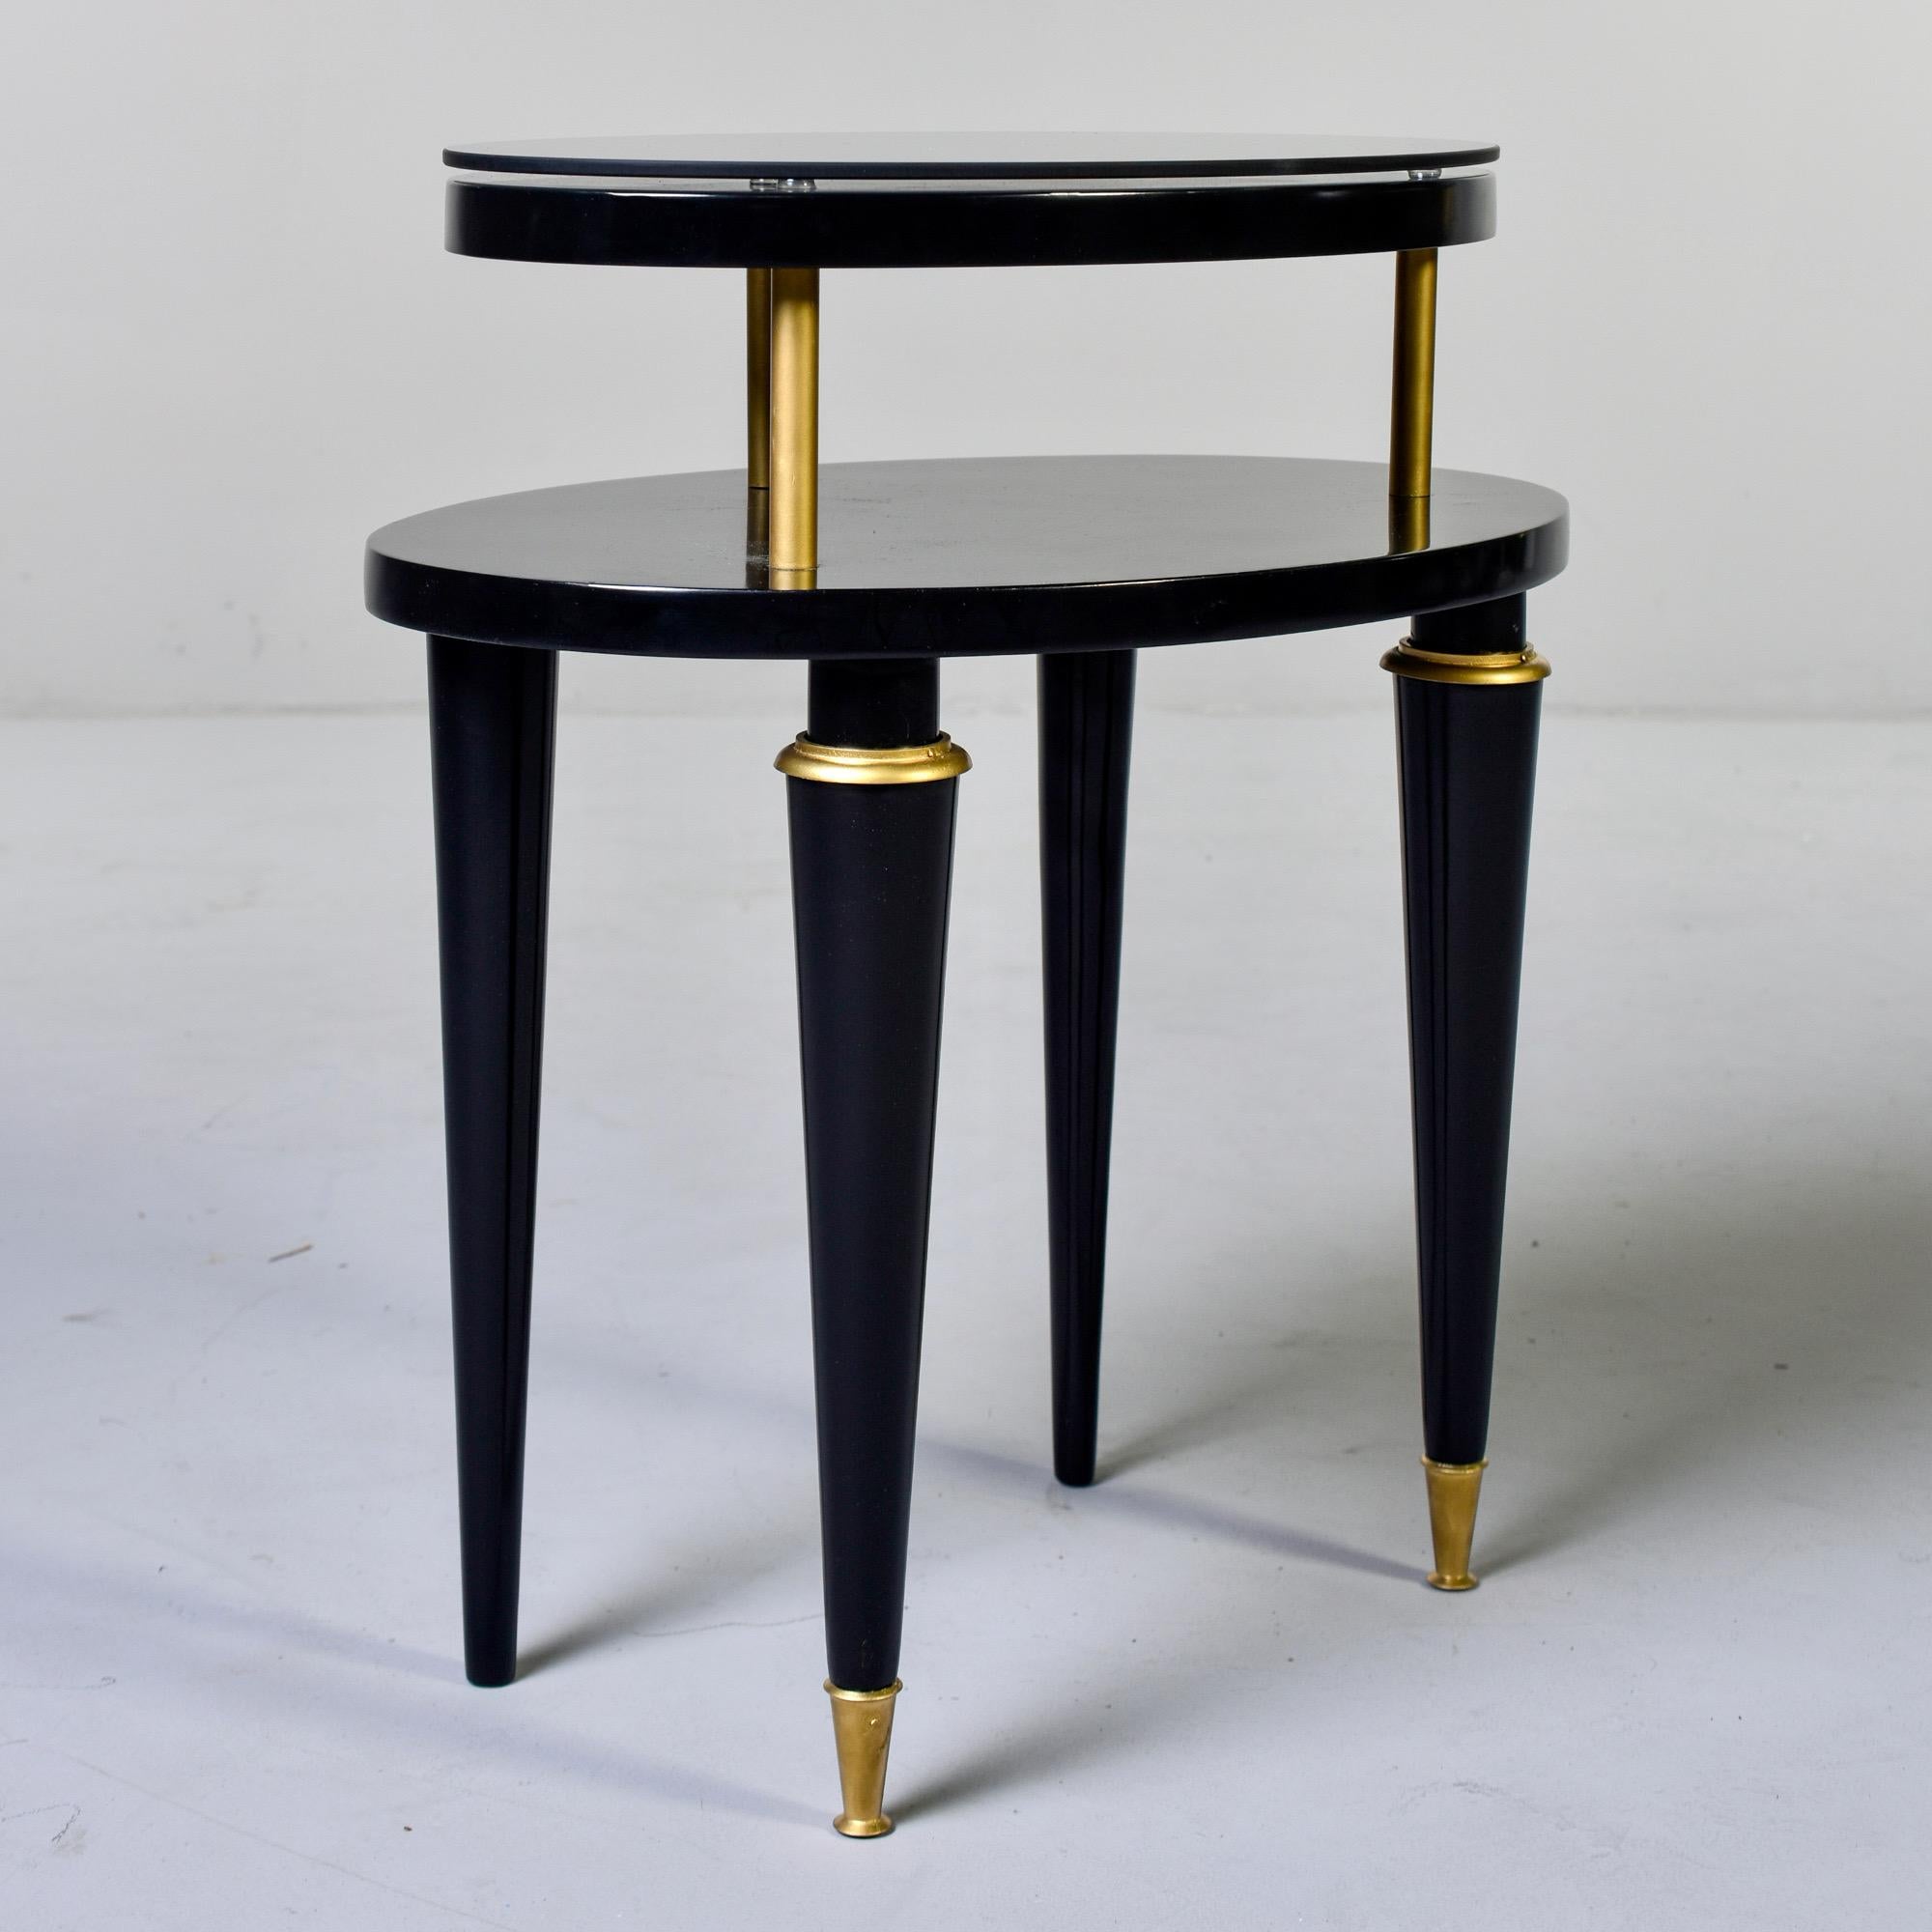 French two tier side table features an oval shaped table top with tapered legs, brass trim and brass supports with a smaller top tier and dark glass oval top, circa 1940s. Unknown maker. New, professionally applied black satin finish.